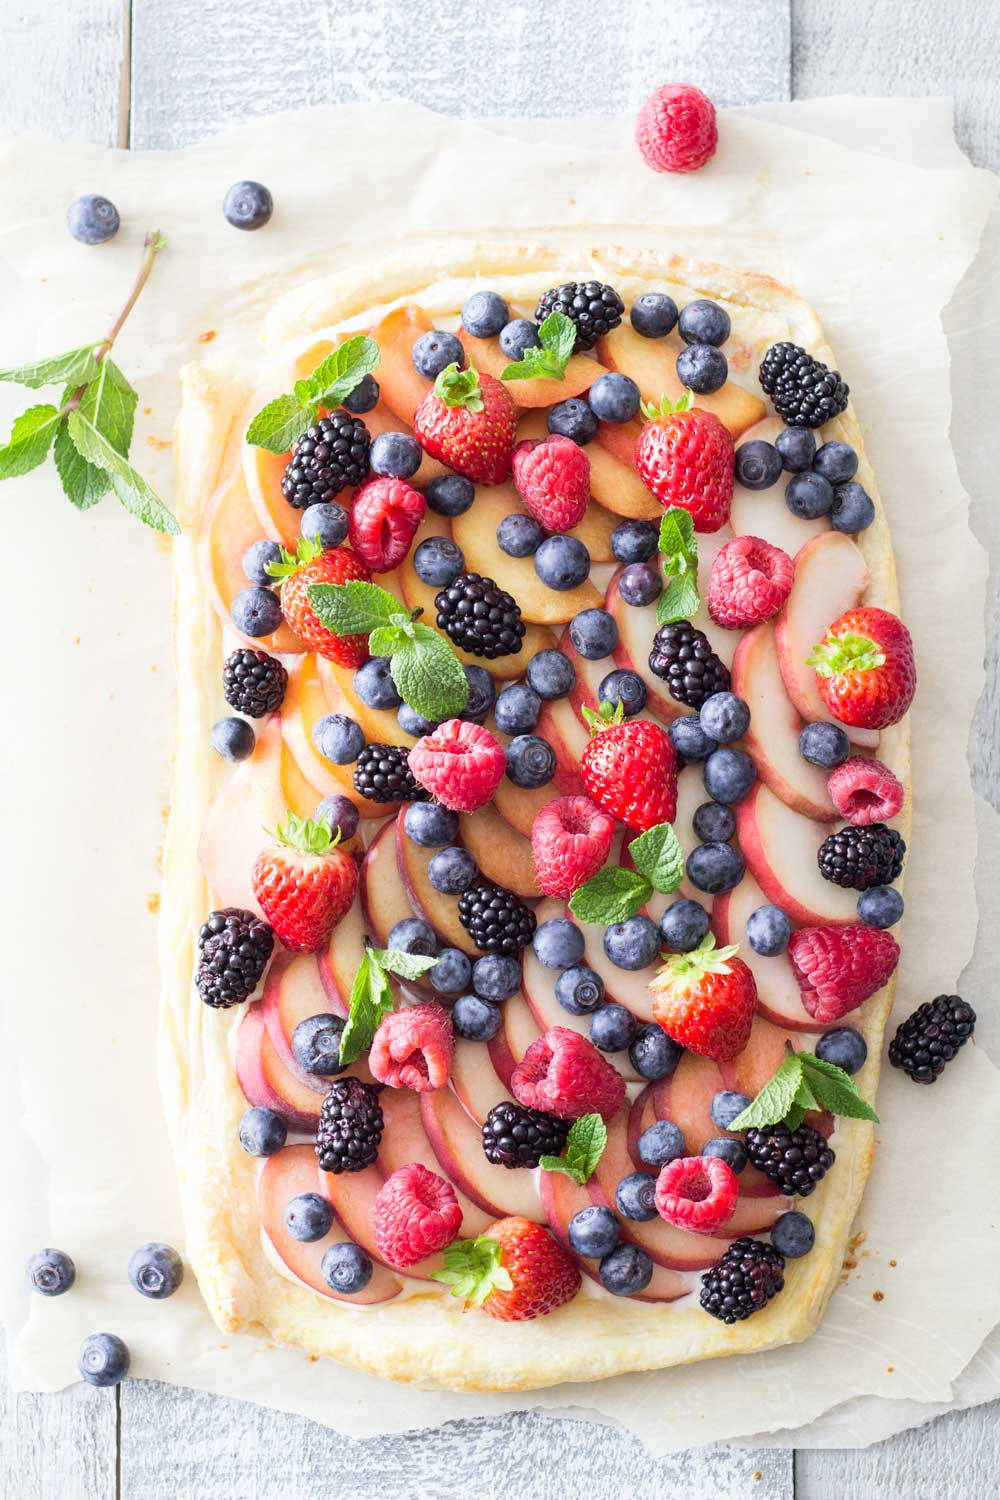 List Of Healthy Desserts
 15 Healthy Desserts for Summer Eating Made Easy